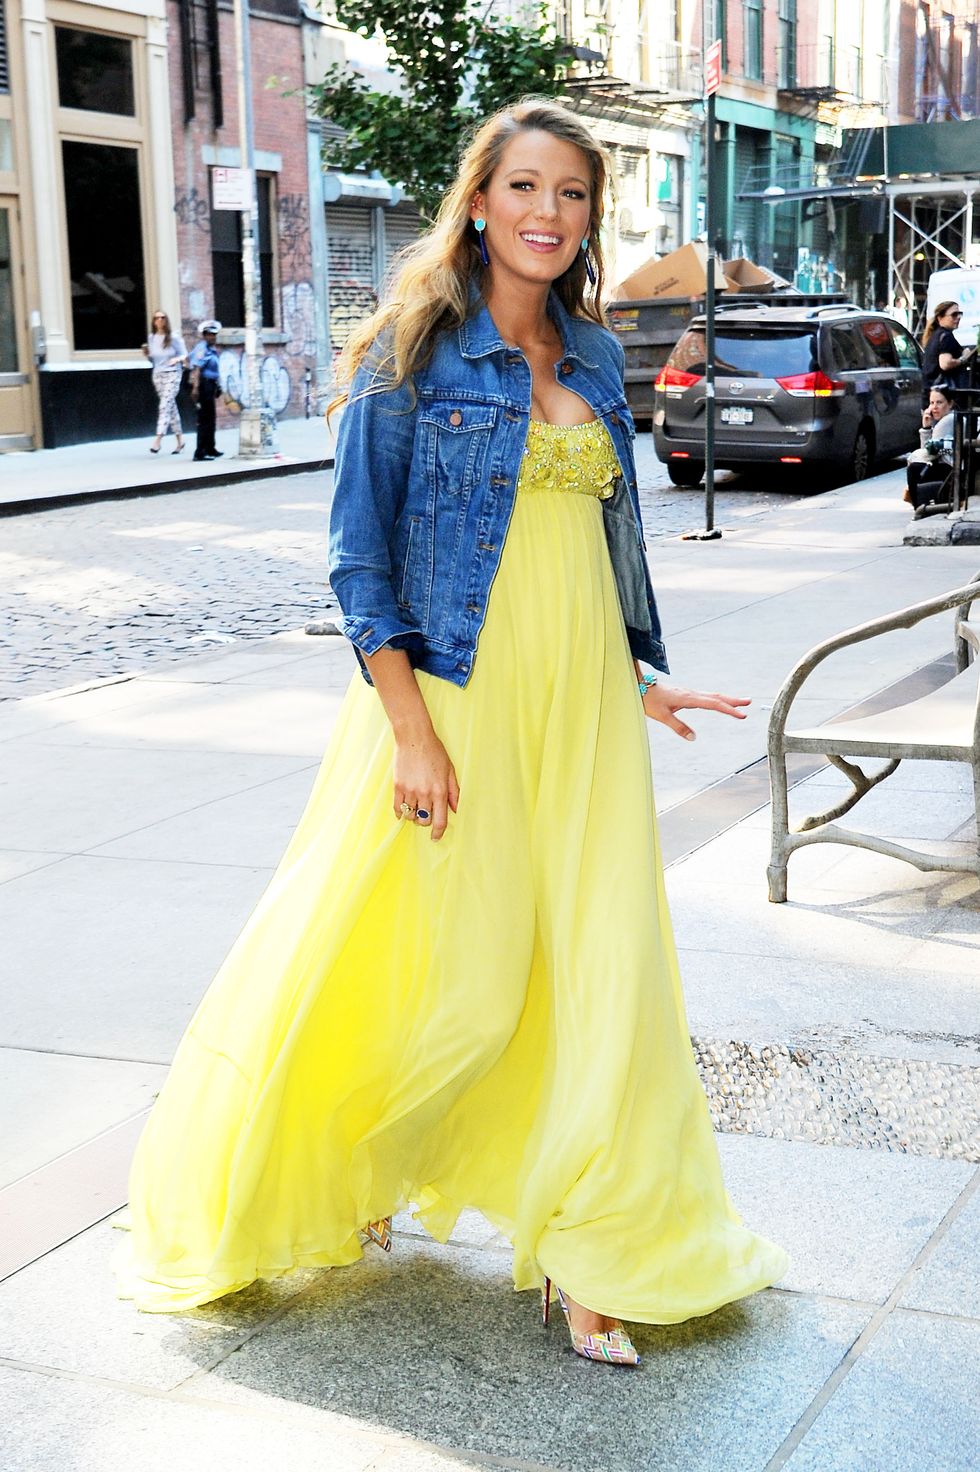 Blake Lively out and about wearing a prom dress and denim jacket